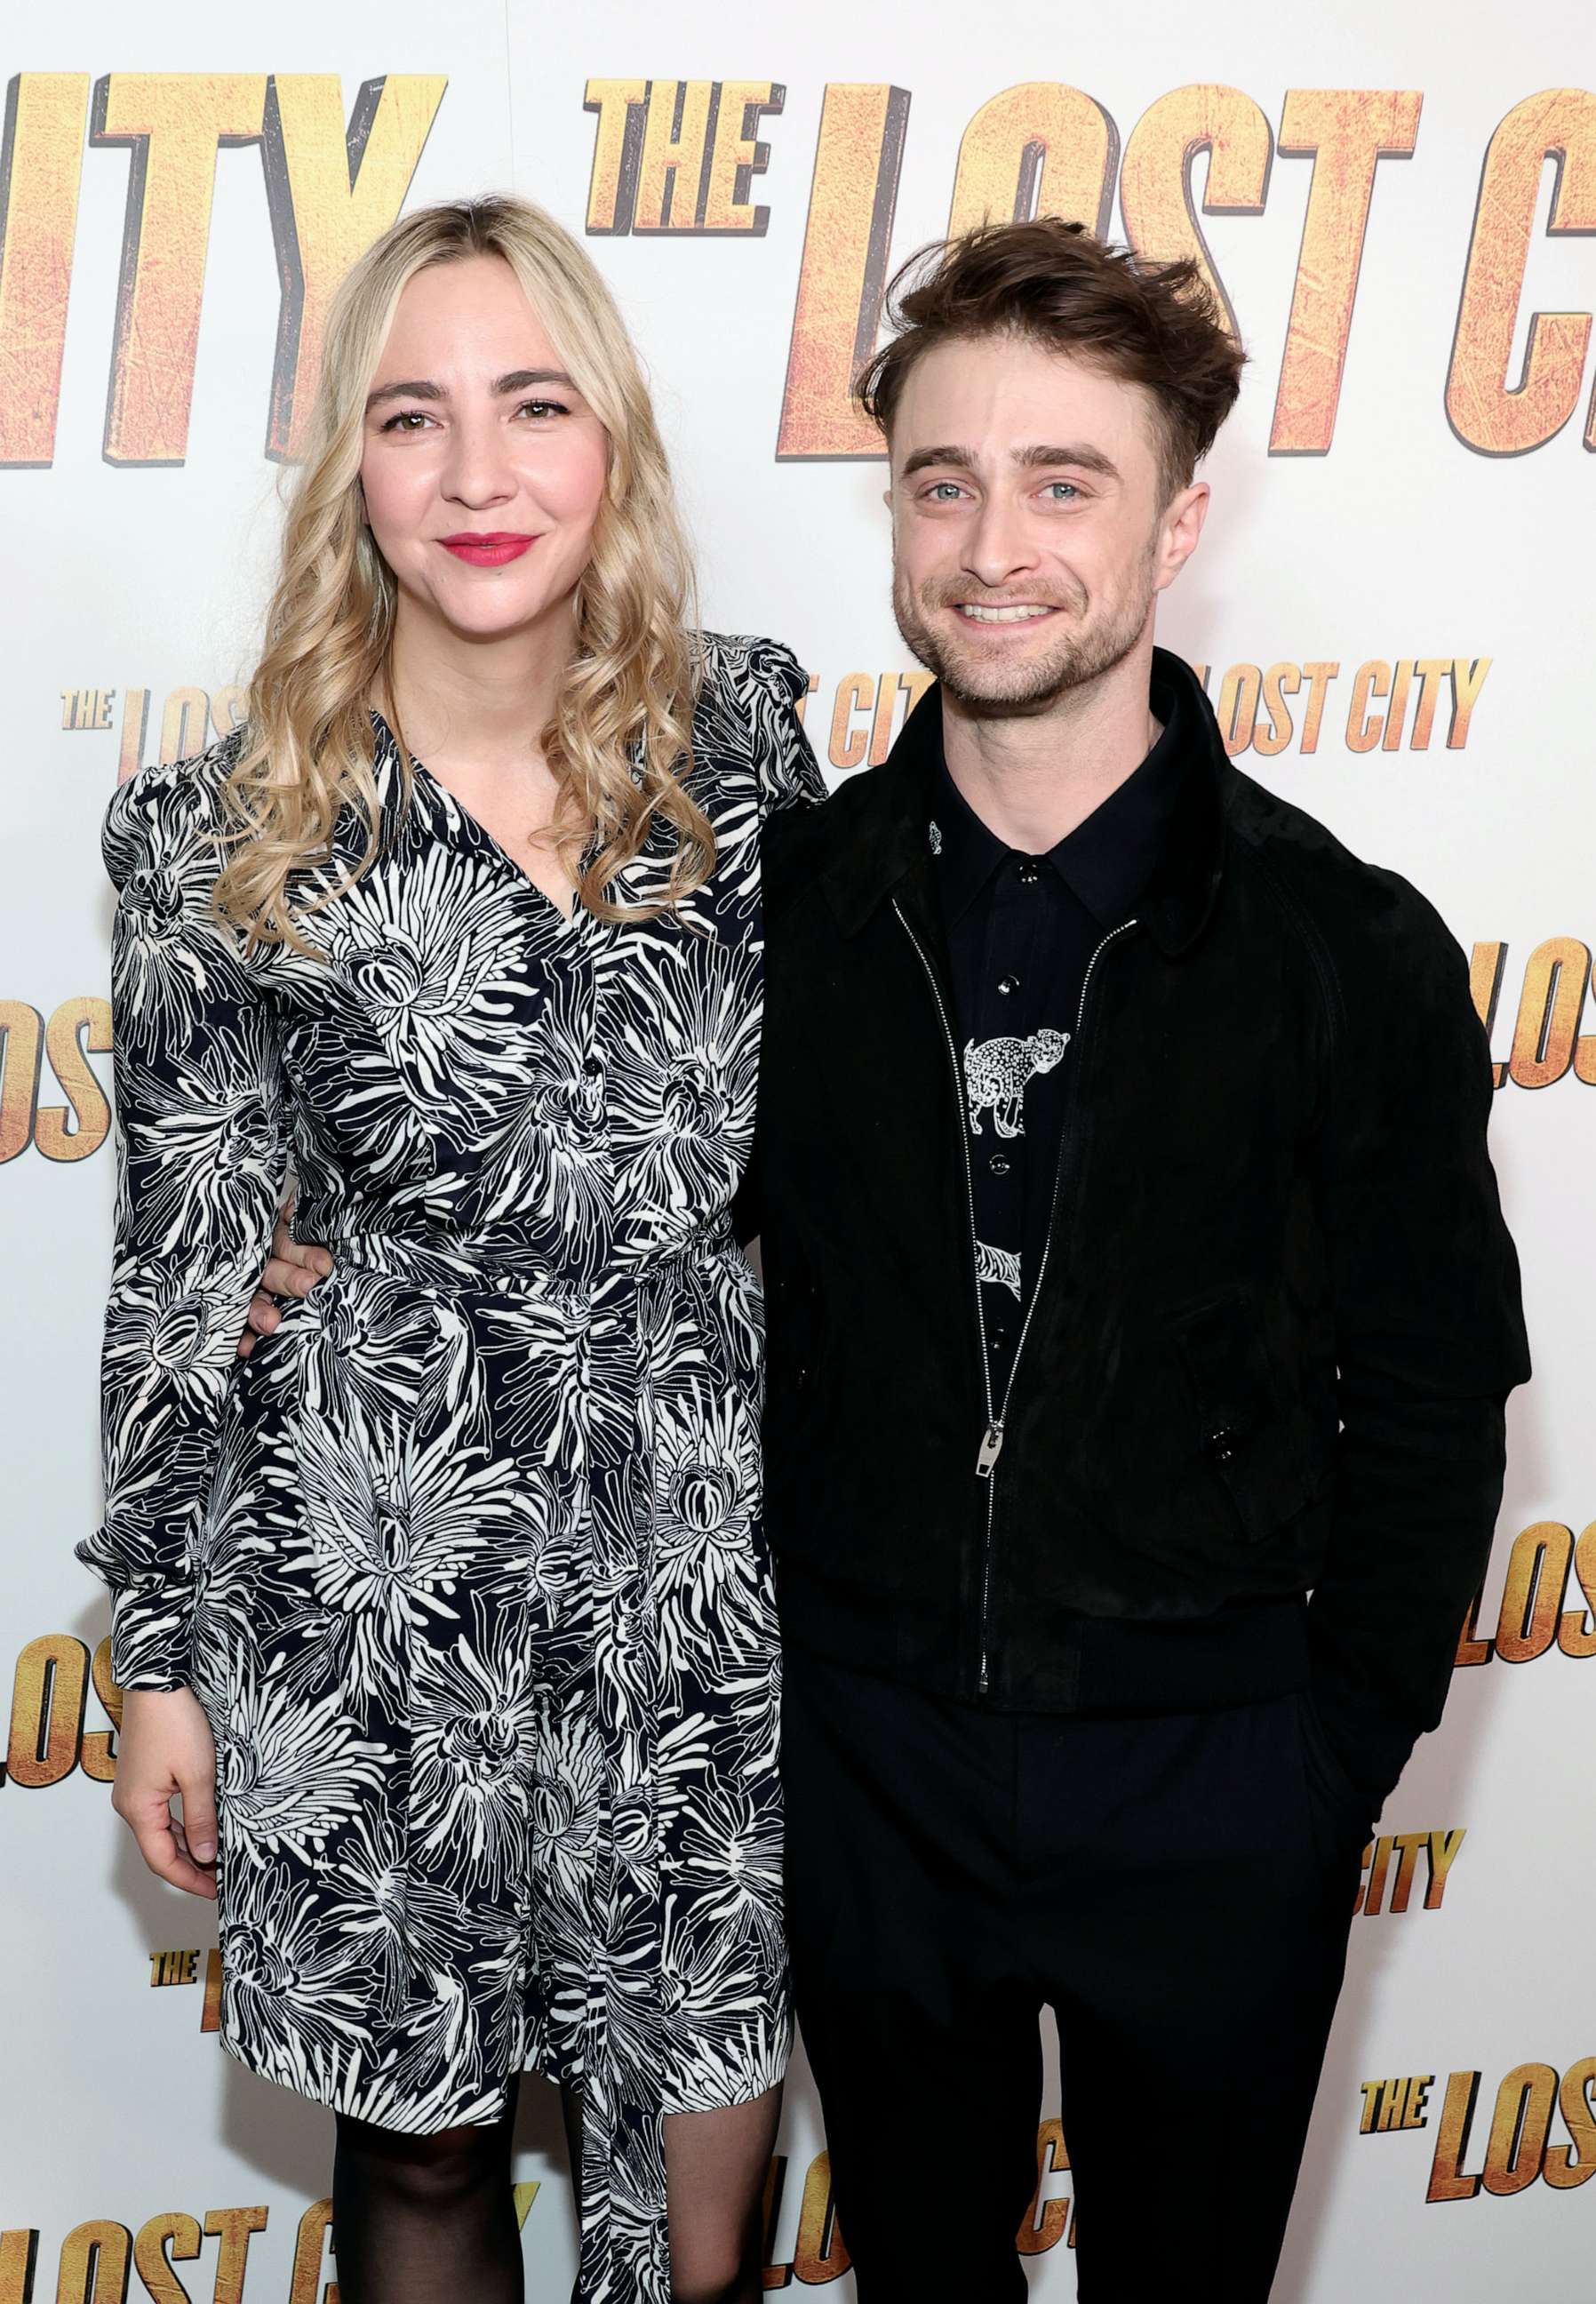 PHOTO: FILE - Erin Darke and Daniel Radcliffe attend a screening of "The Lost City" at the Whitby Hotel, March 14, 2022 in New York City.